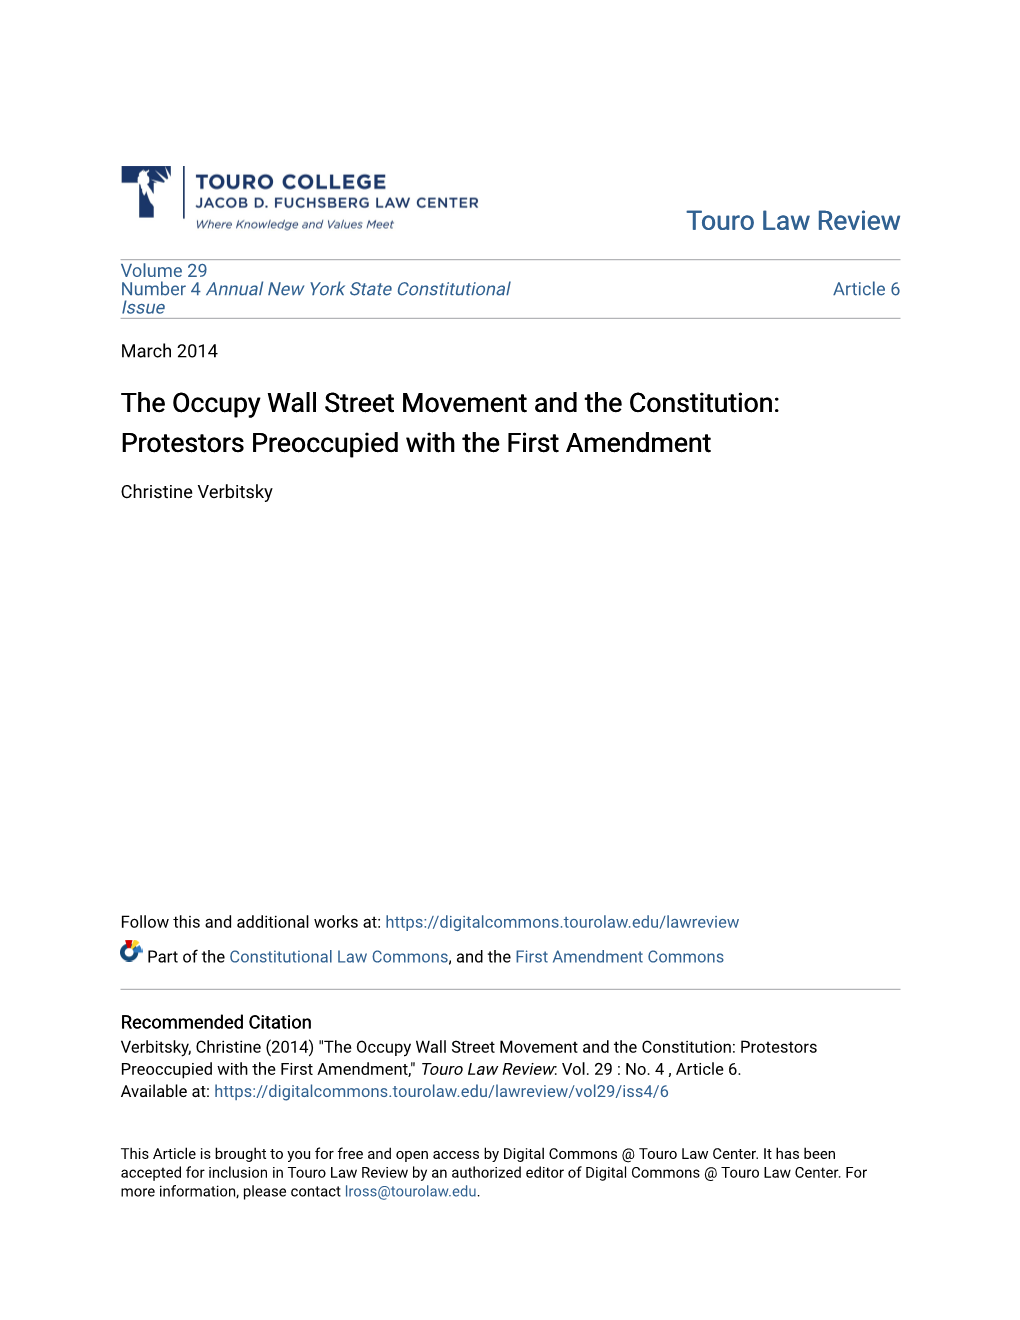 The Occupy Wall Street Movement and the Constitution: Protestors Preoccupied with the First Amendment